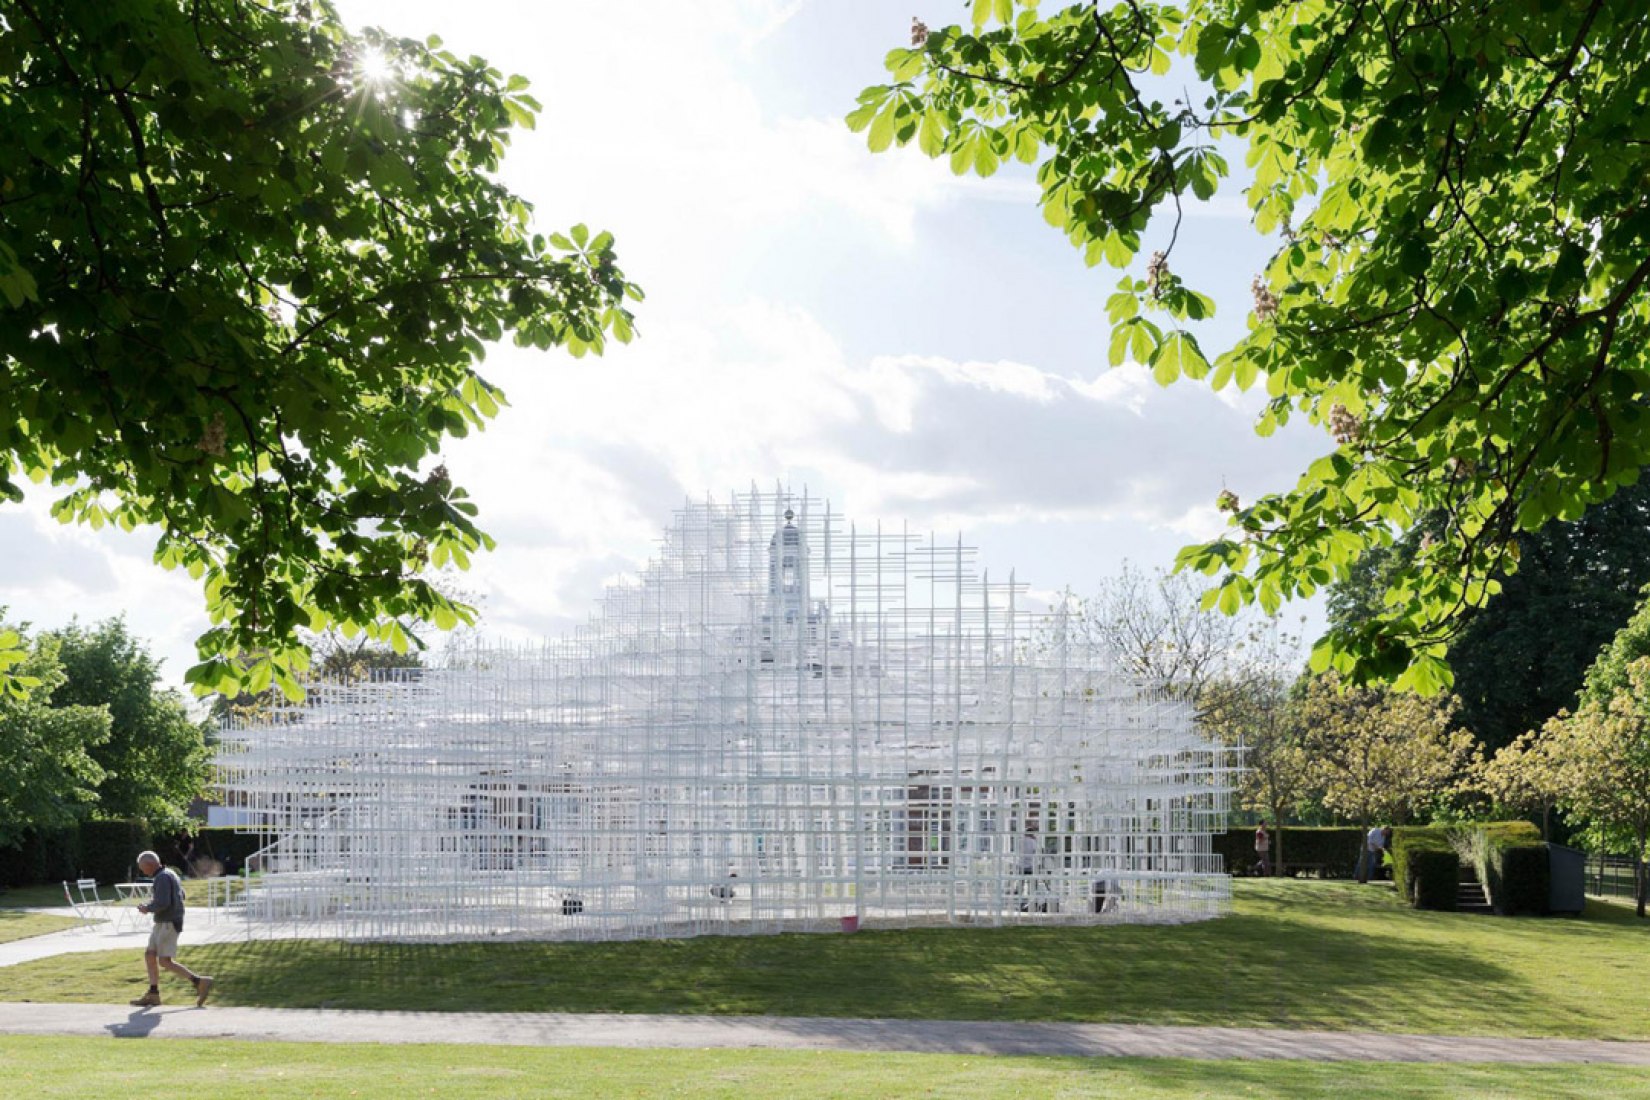 Opening, The Serpentine Gallery Pavilion 2013. Photography © Iwan Baan